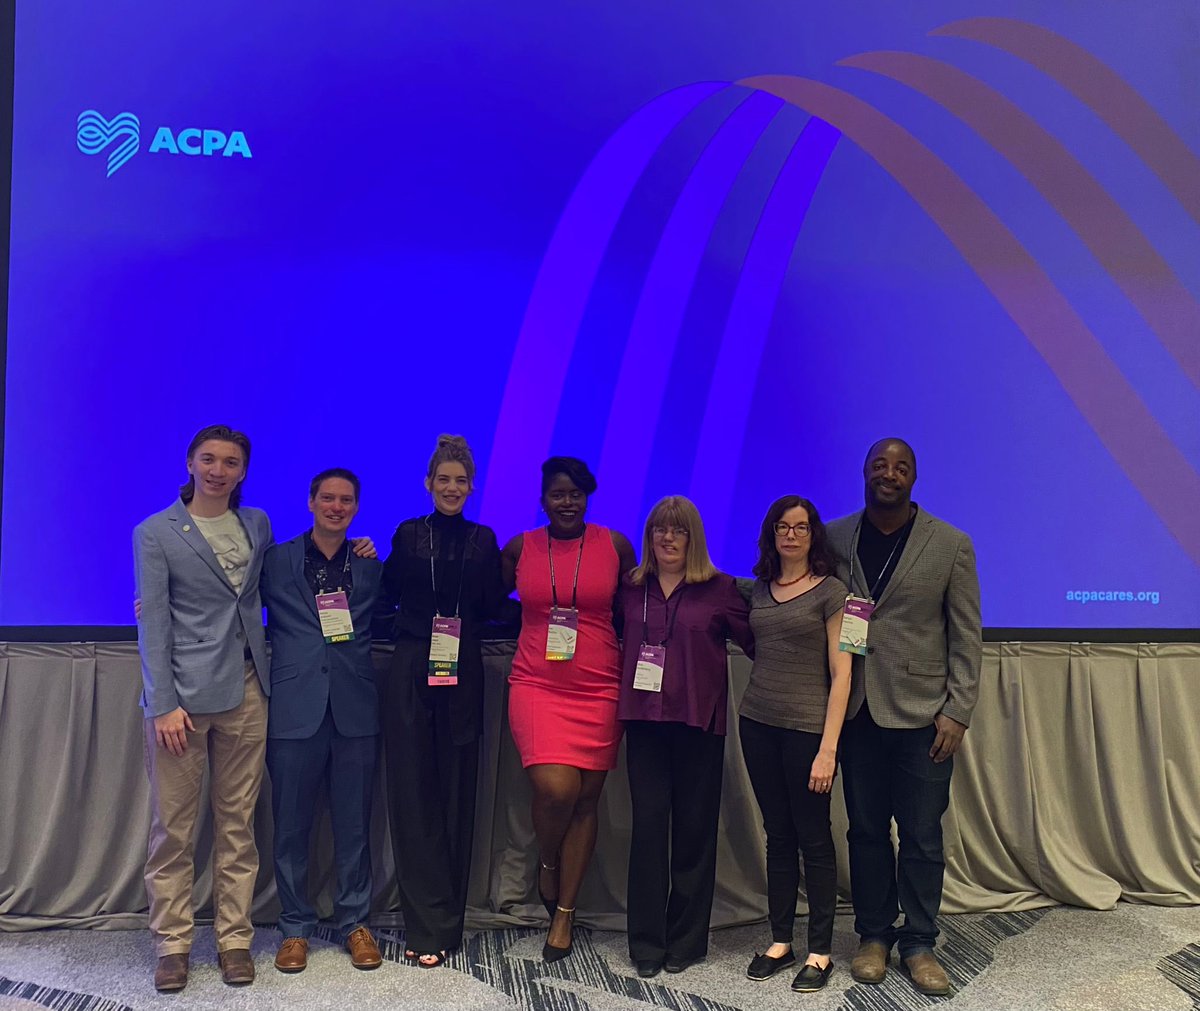 I’ve had an amazing week at #ACPAAM24 in Denver! It’s been incredible to (re)connect with colleagues, & delivering an incredible panel together which was described by a very experienced delegate as “an historic moment”. I am heading home having made new friends - my cup is full!